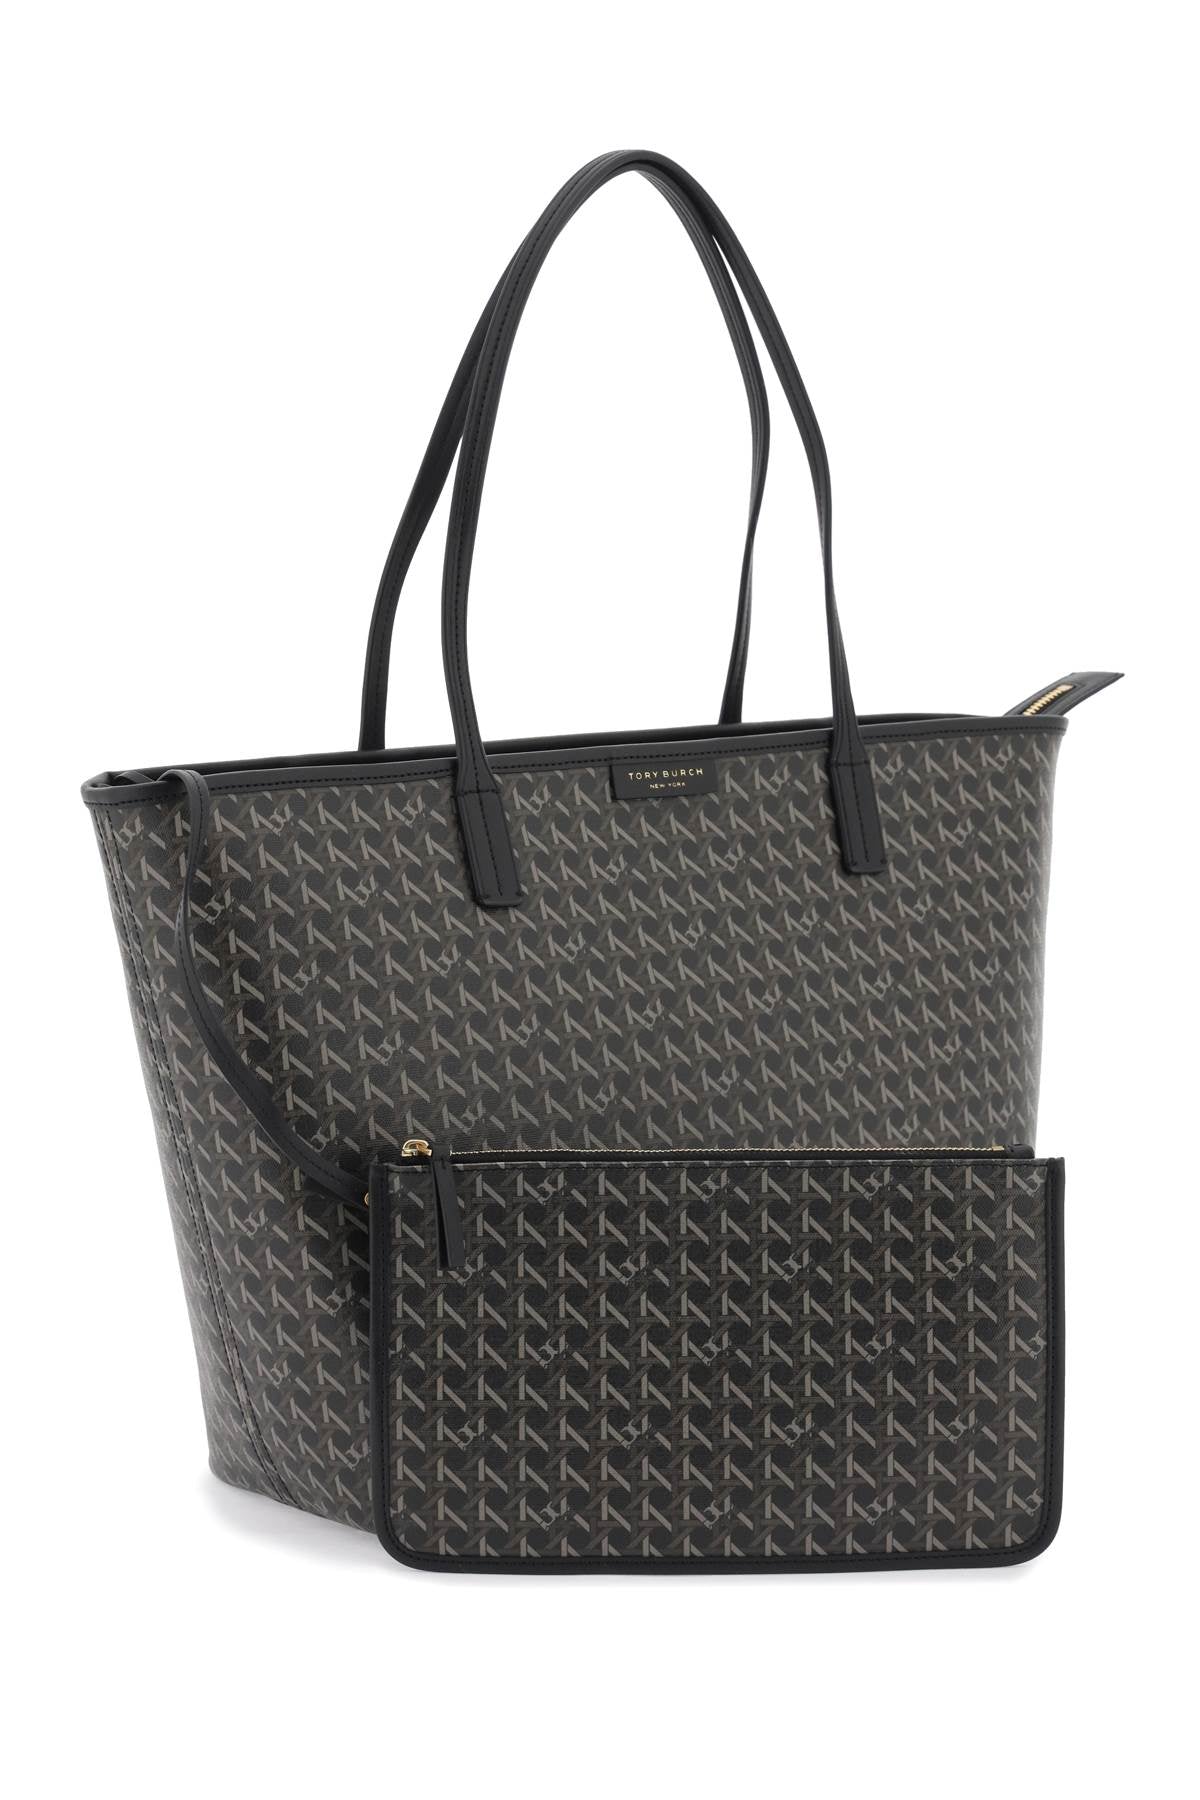 Tory burch ever-ready tote bag-2